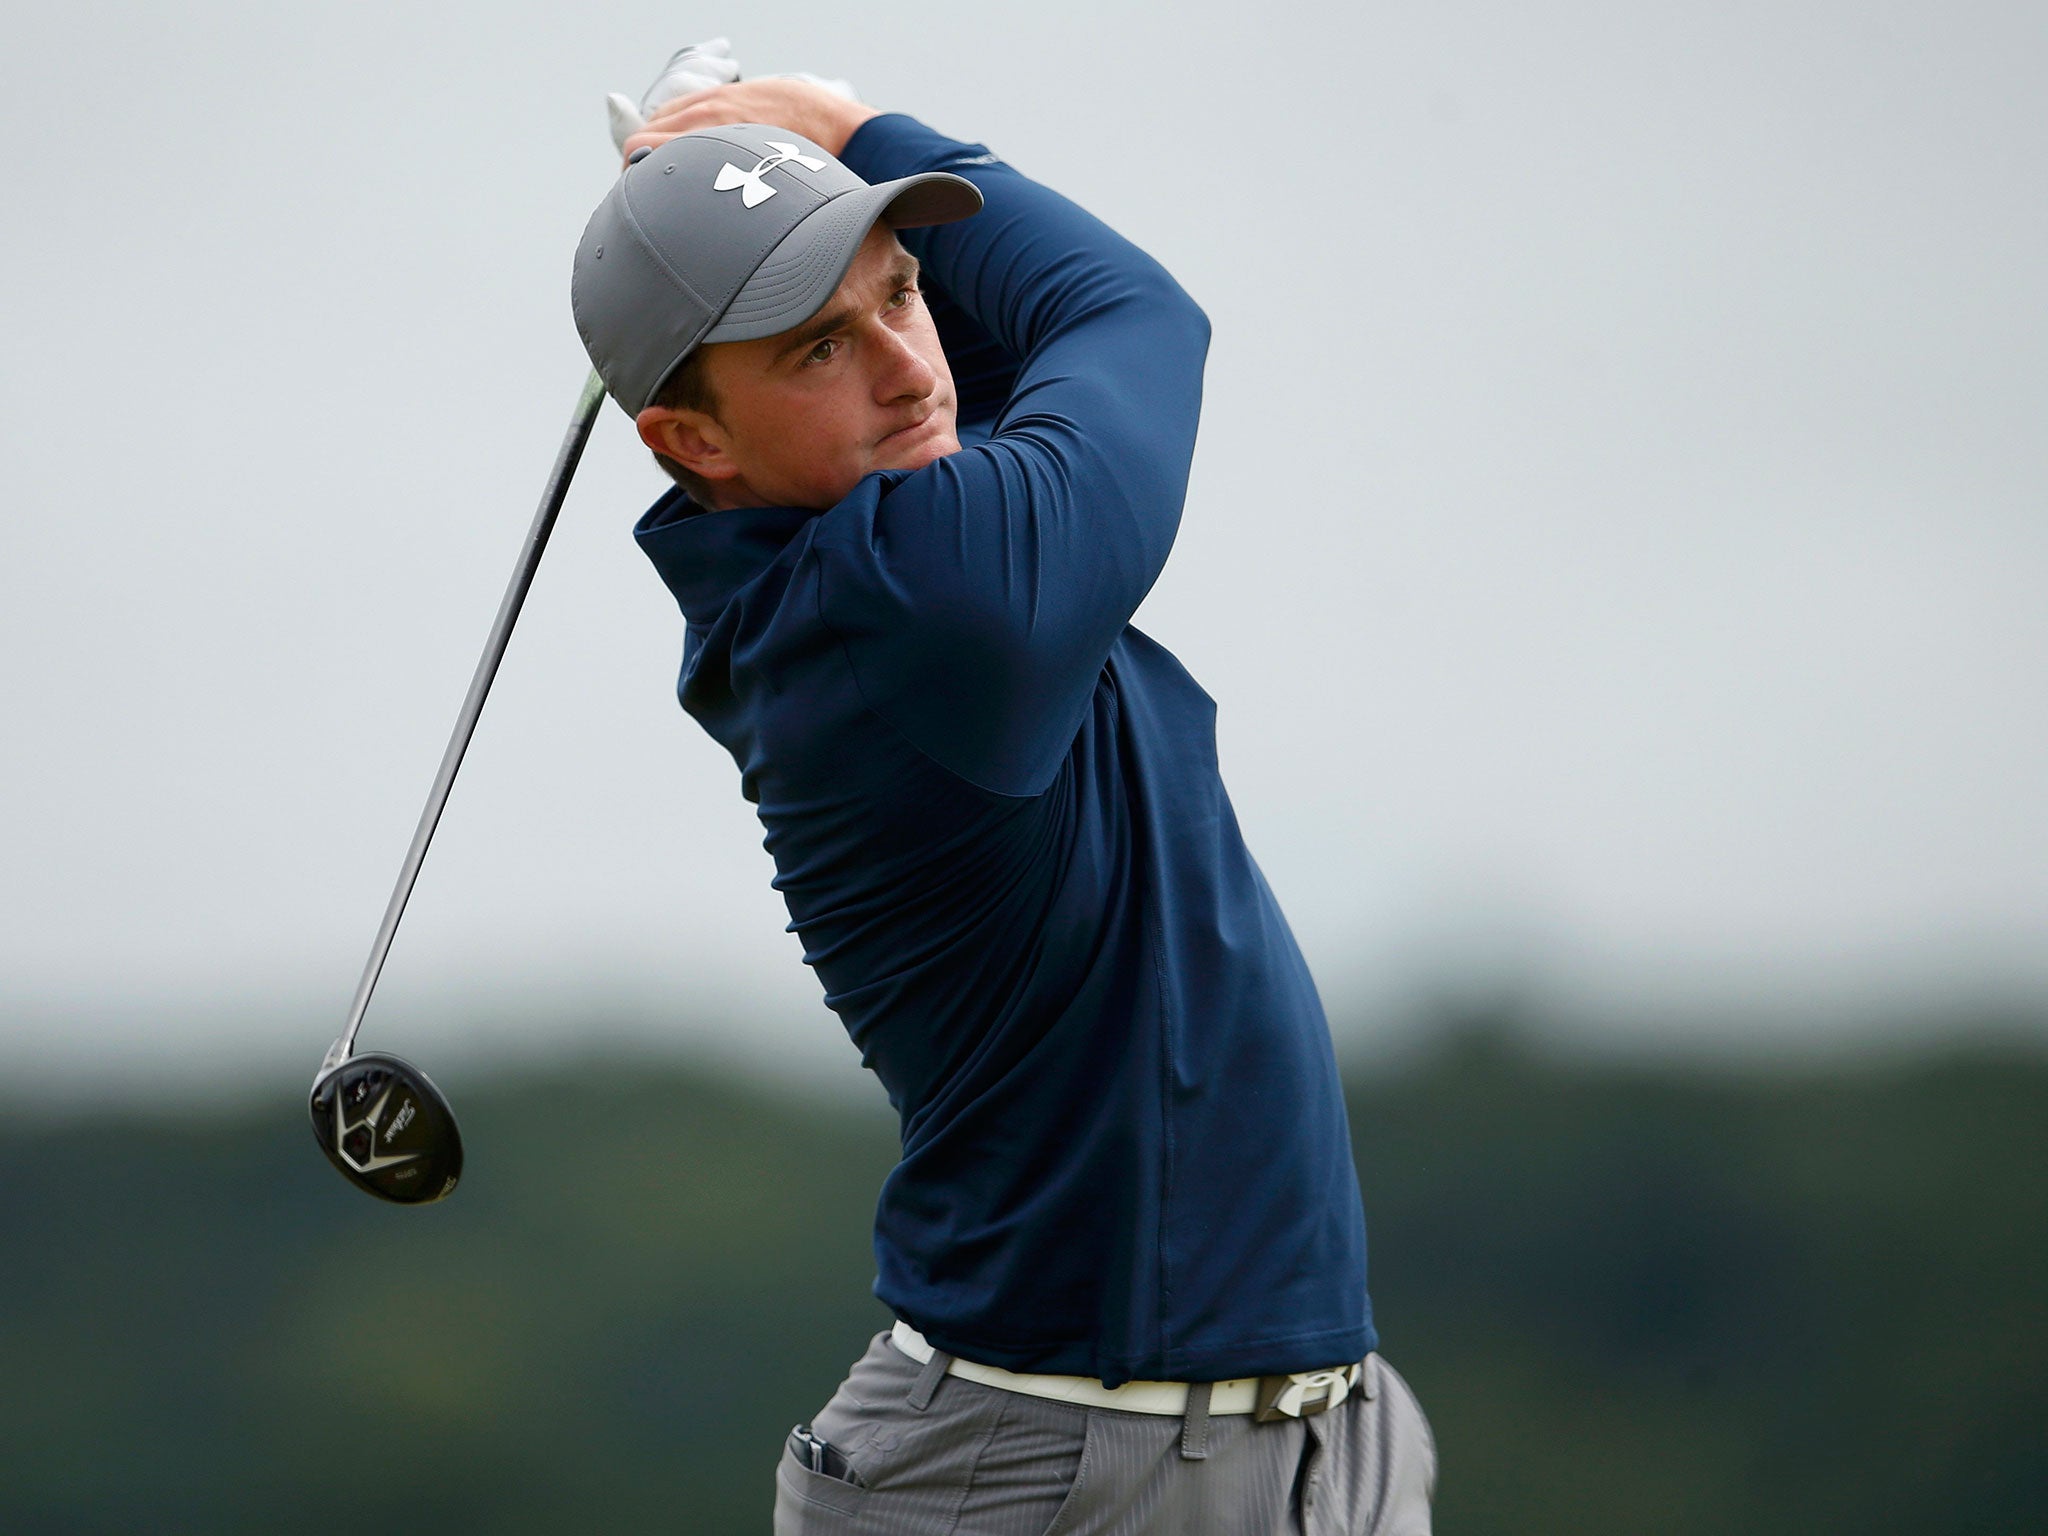 Irish amateur Paul Dunne stunned fans at The Open when he took the lead